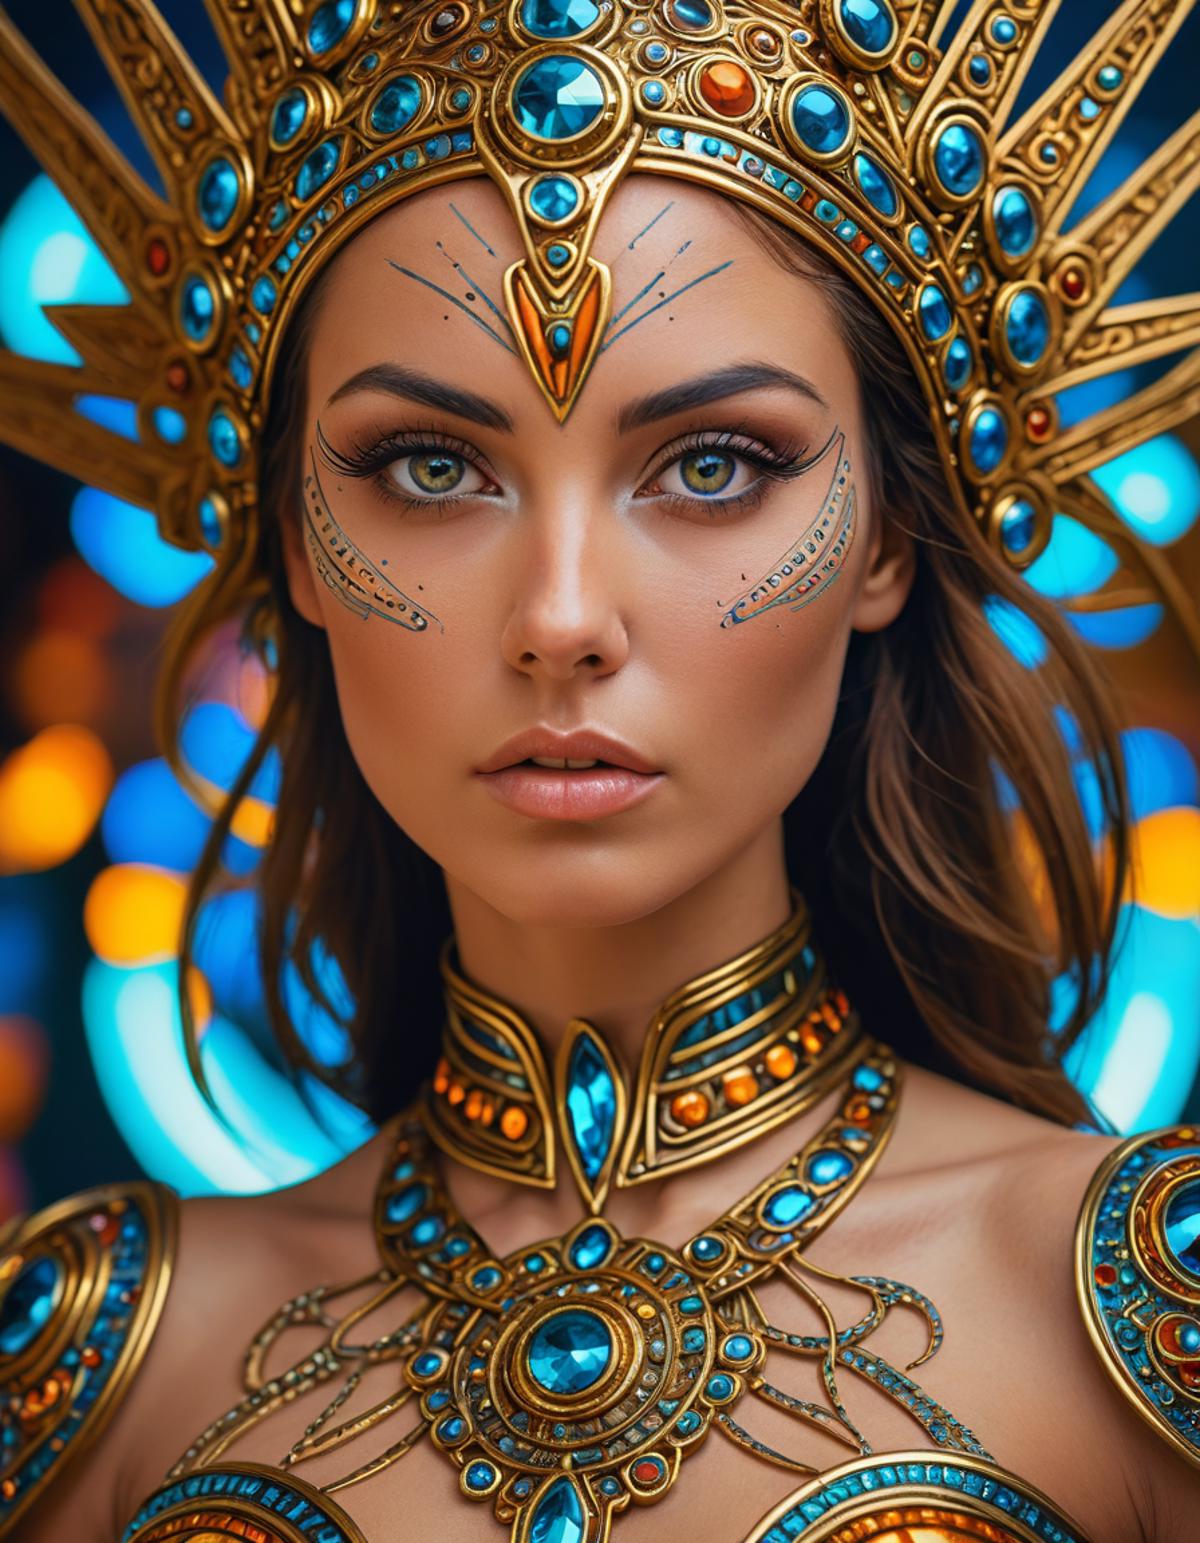 A woman wearing Egyptian makeup and a blue and gold headpiece, with blue eyeshadow and a gold necklace.